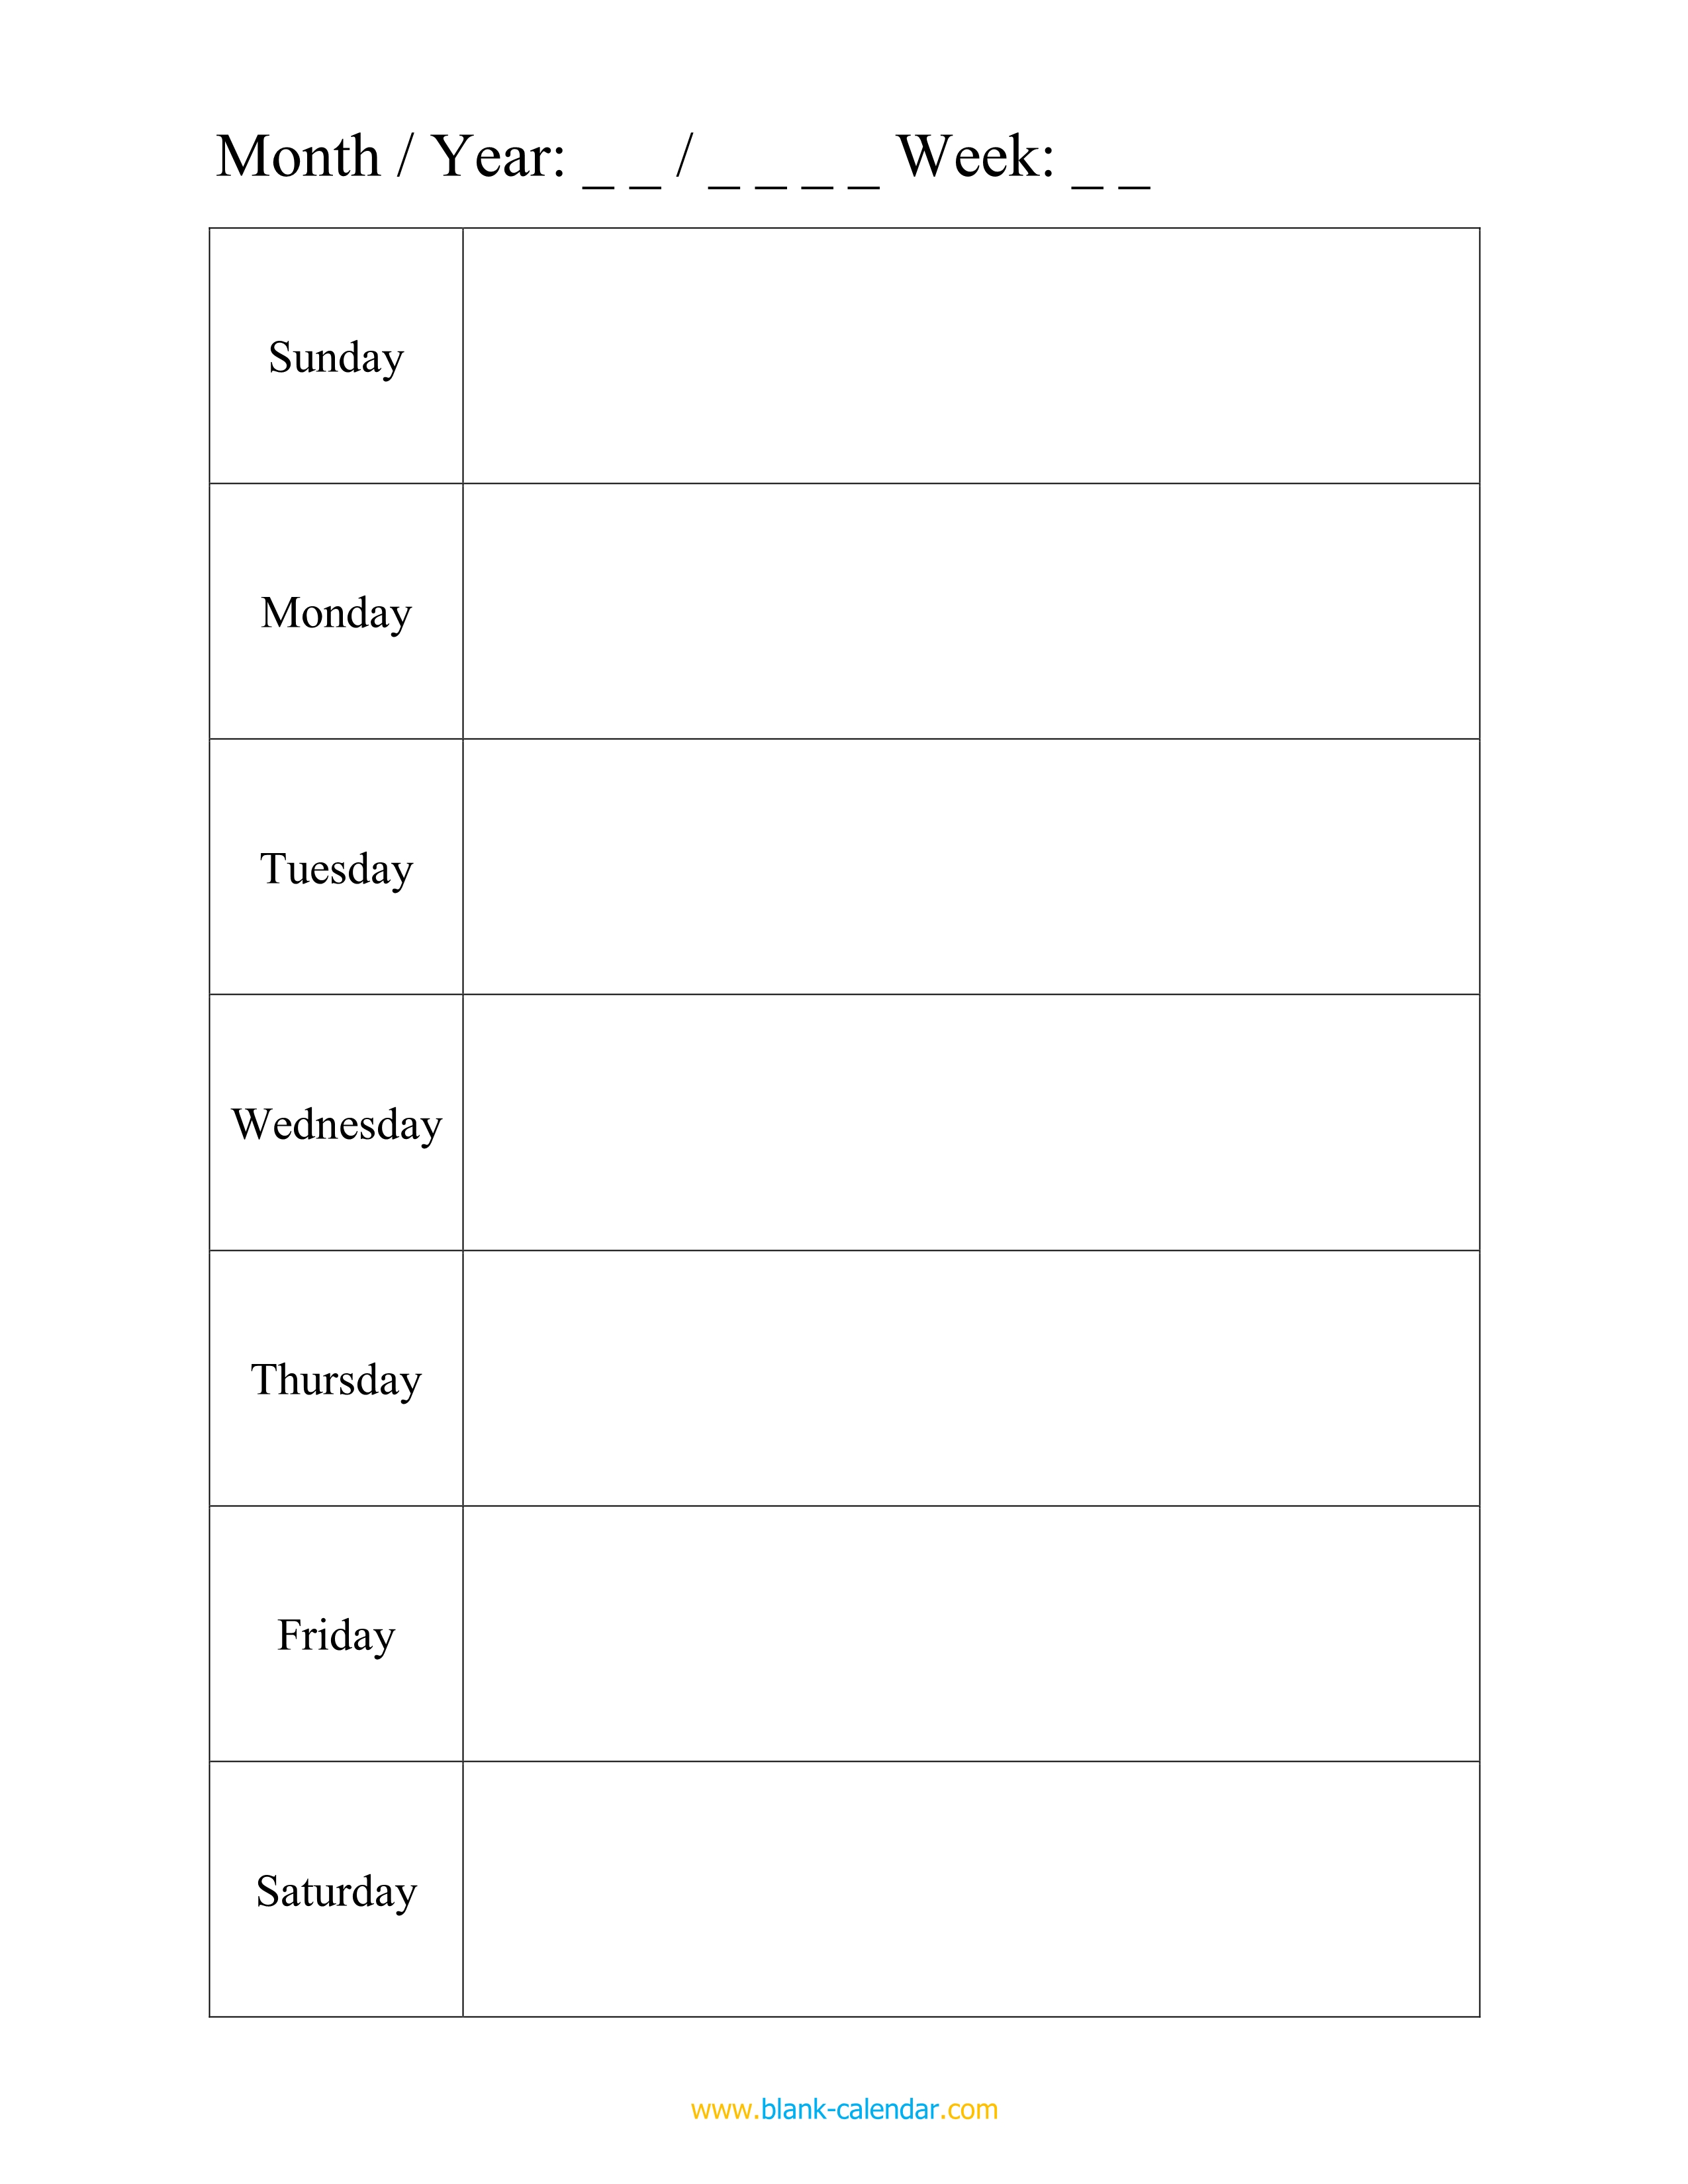 Downloadable Weekly Schedule Template from www.blank-calendar.com